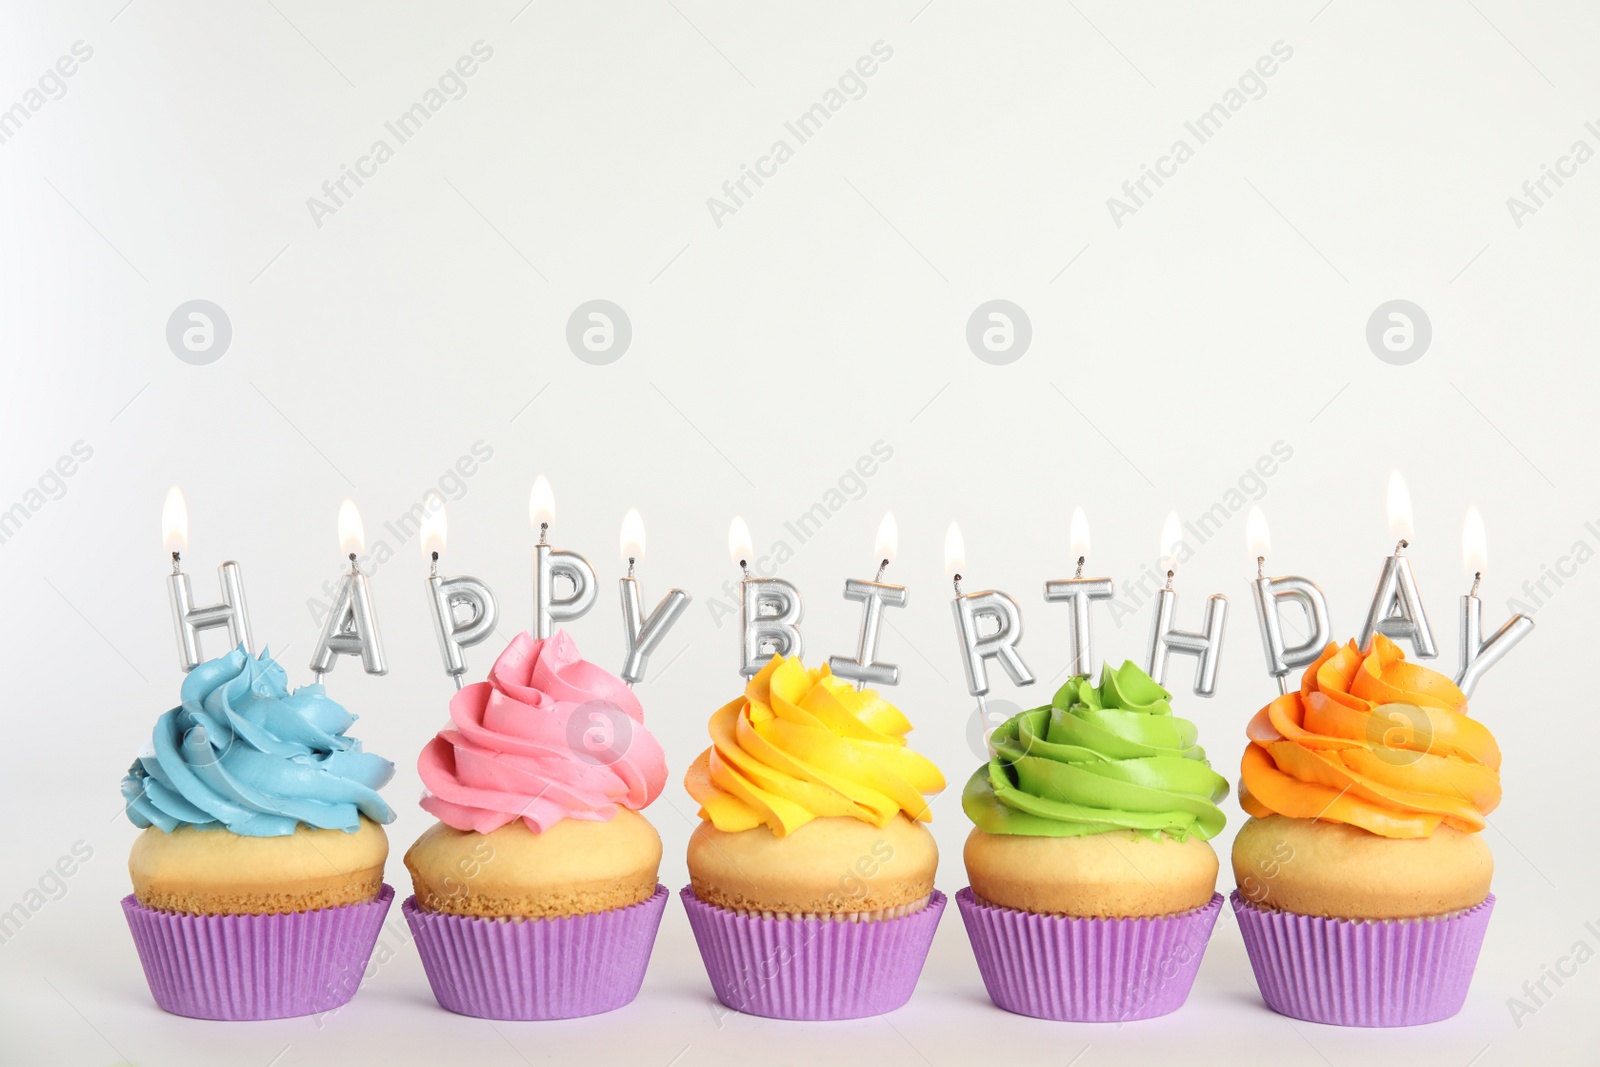 Photo of Birthday cupcakes with burning candles on white background